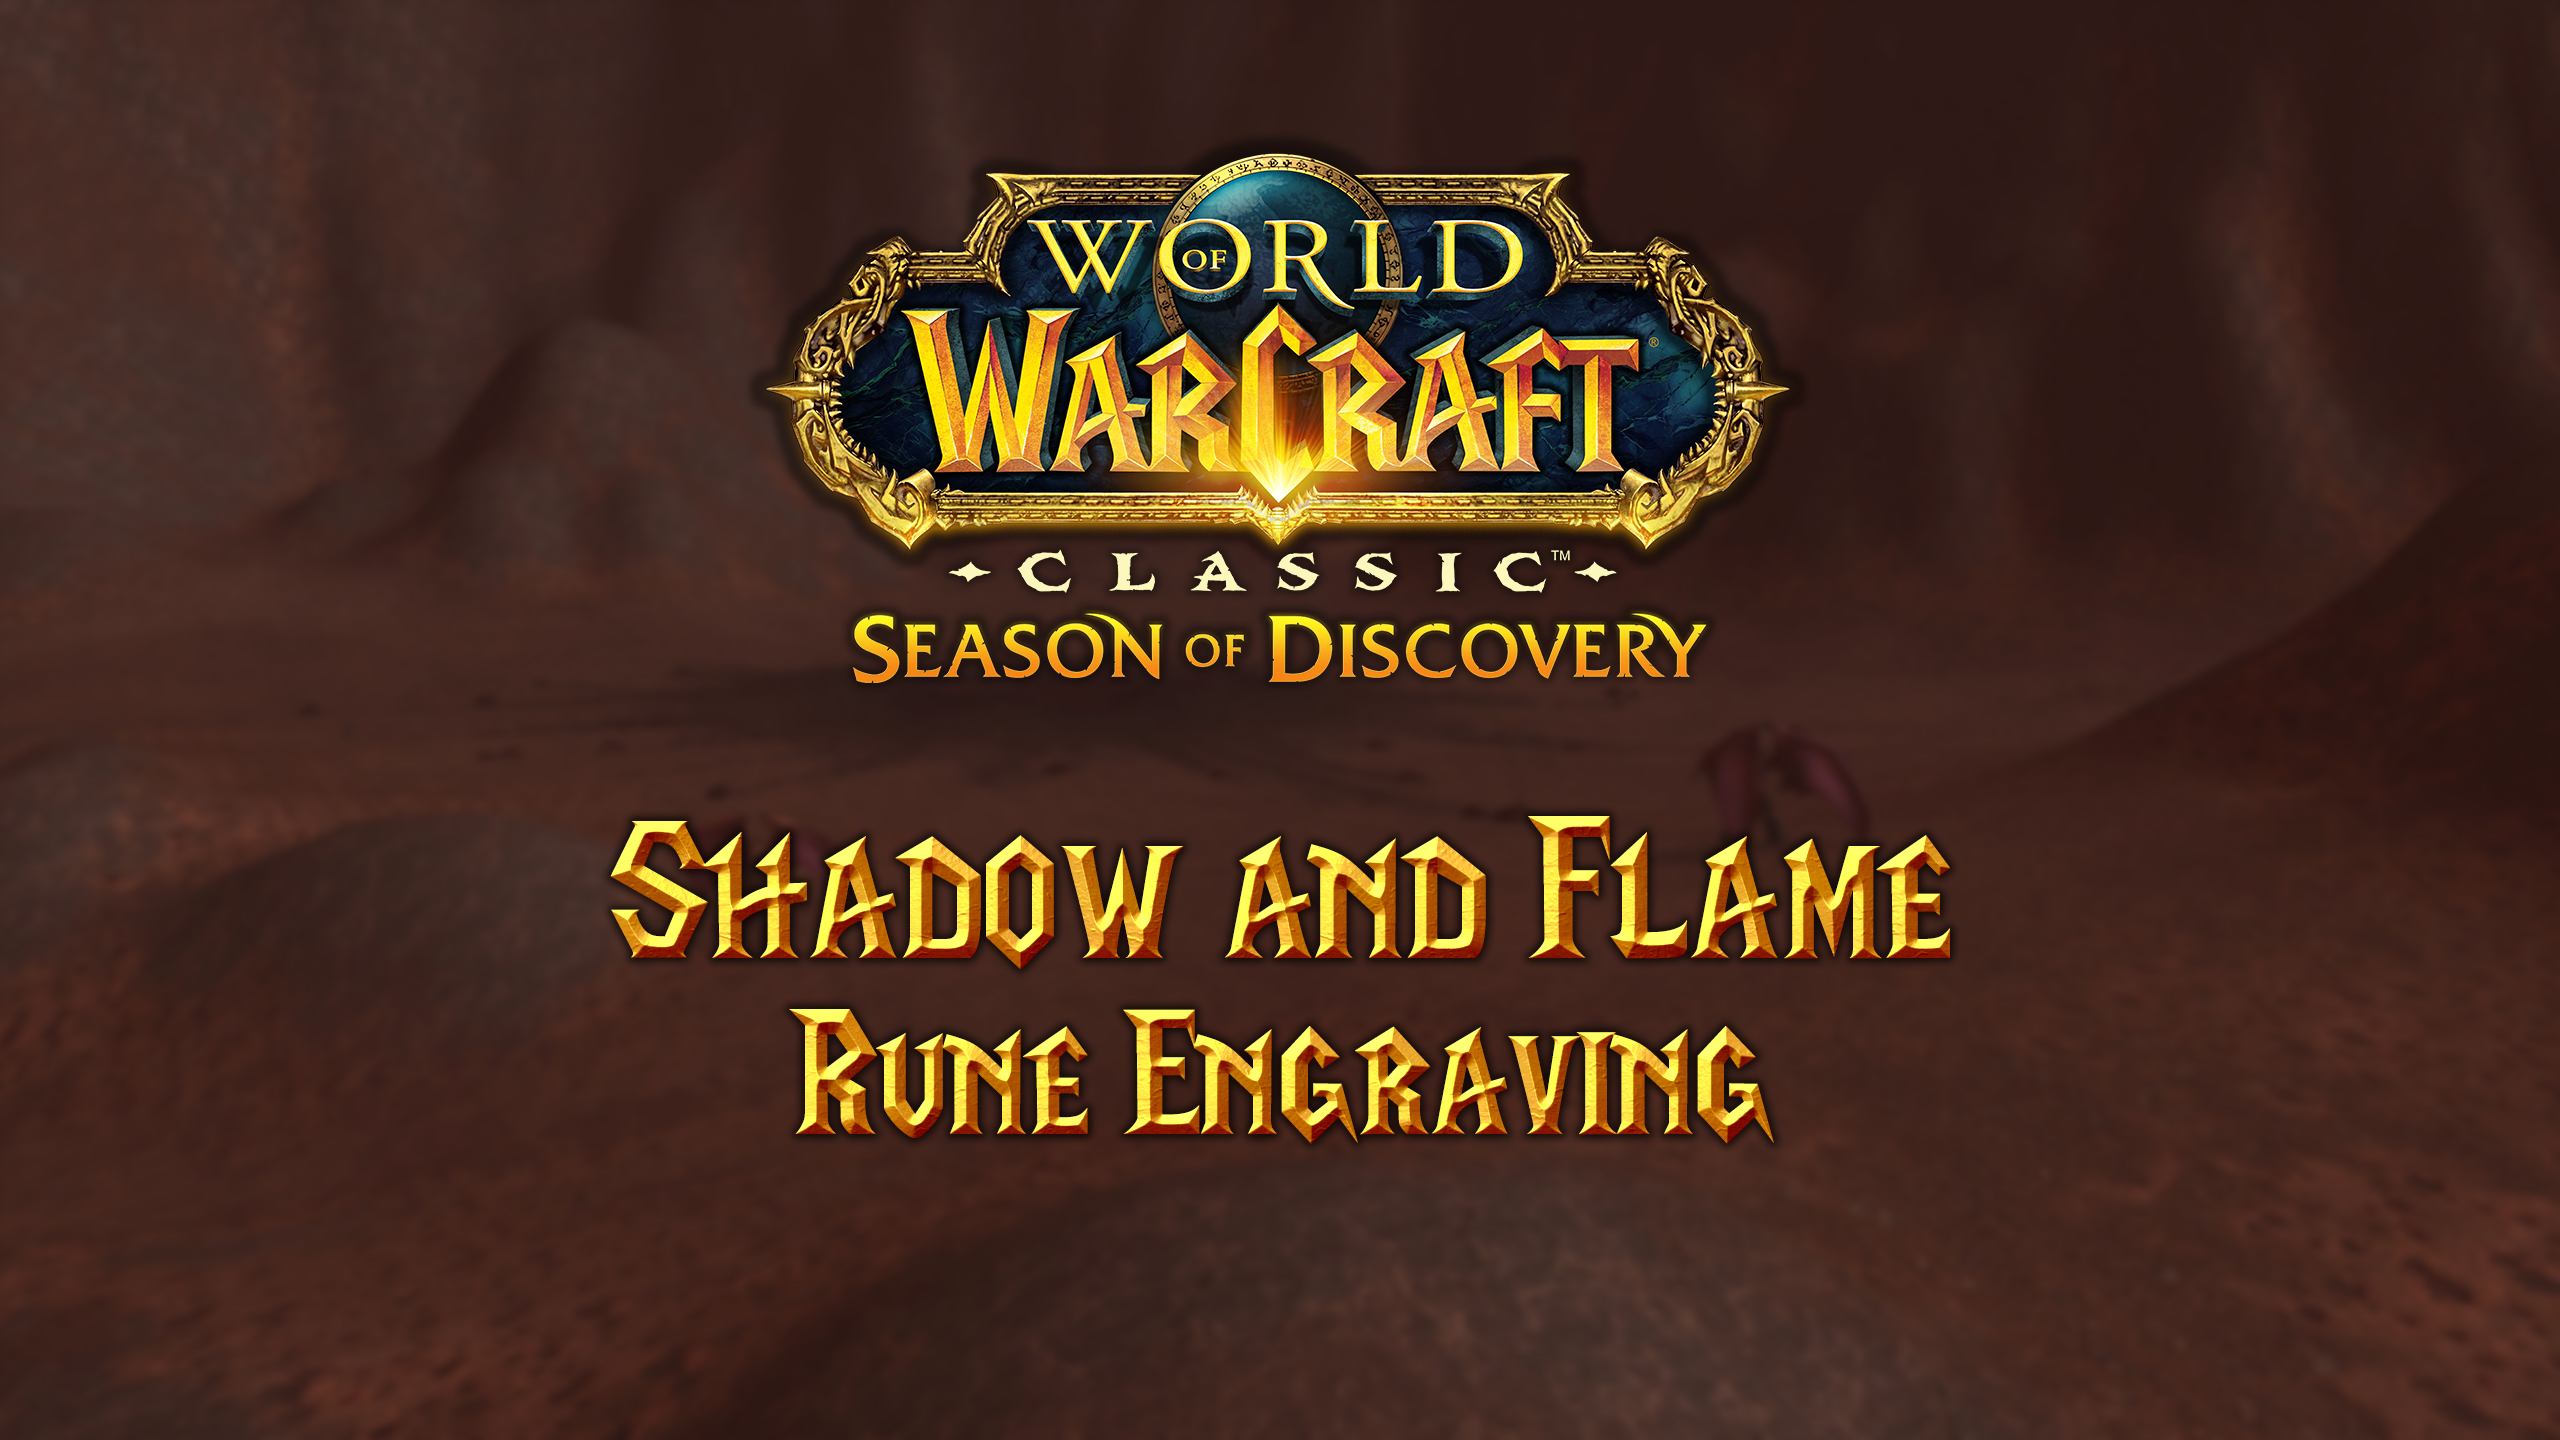 Where to Find the Shadow and Flame Rune in Season of Discovery (SoD)